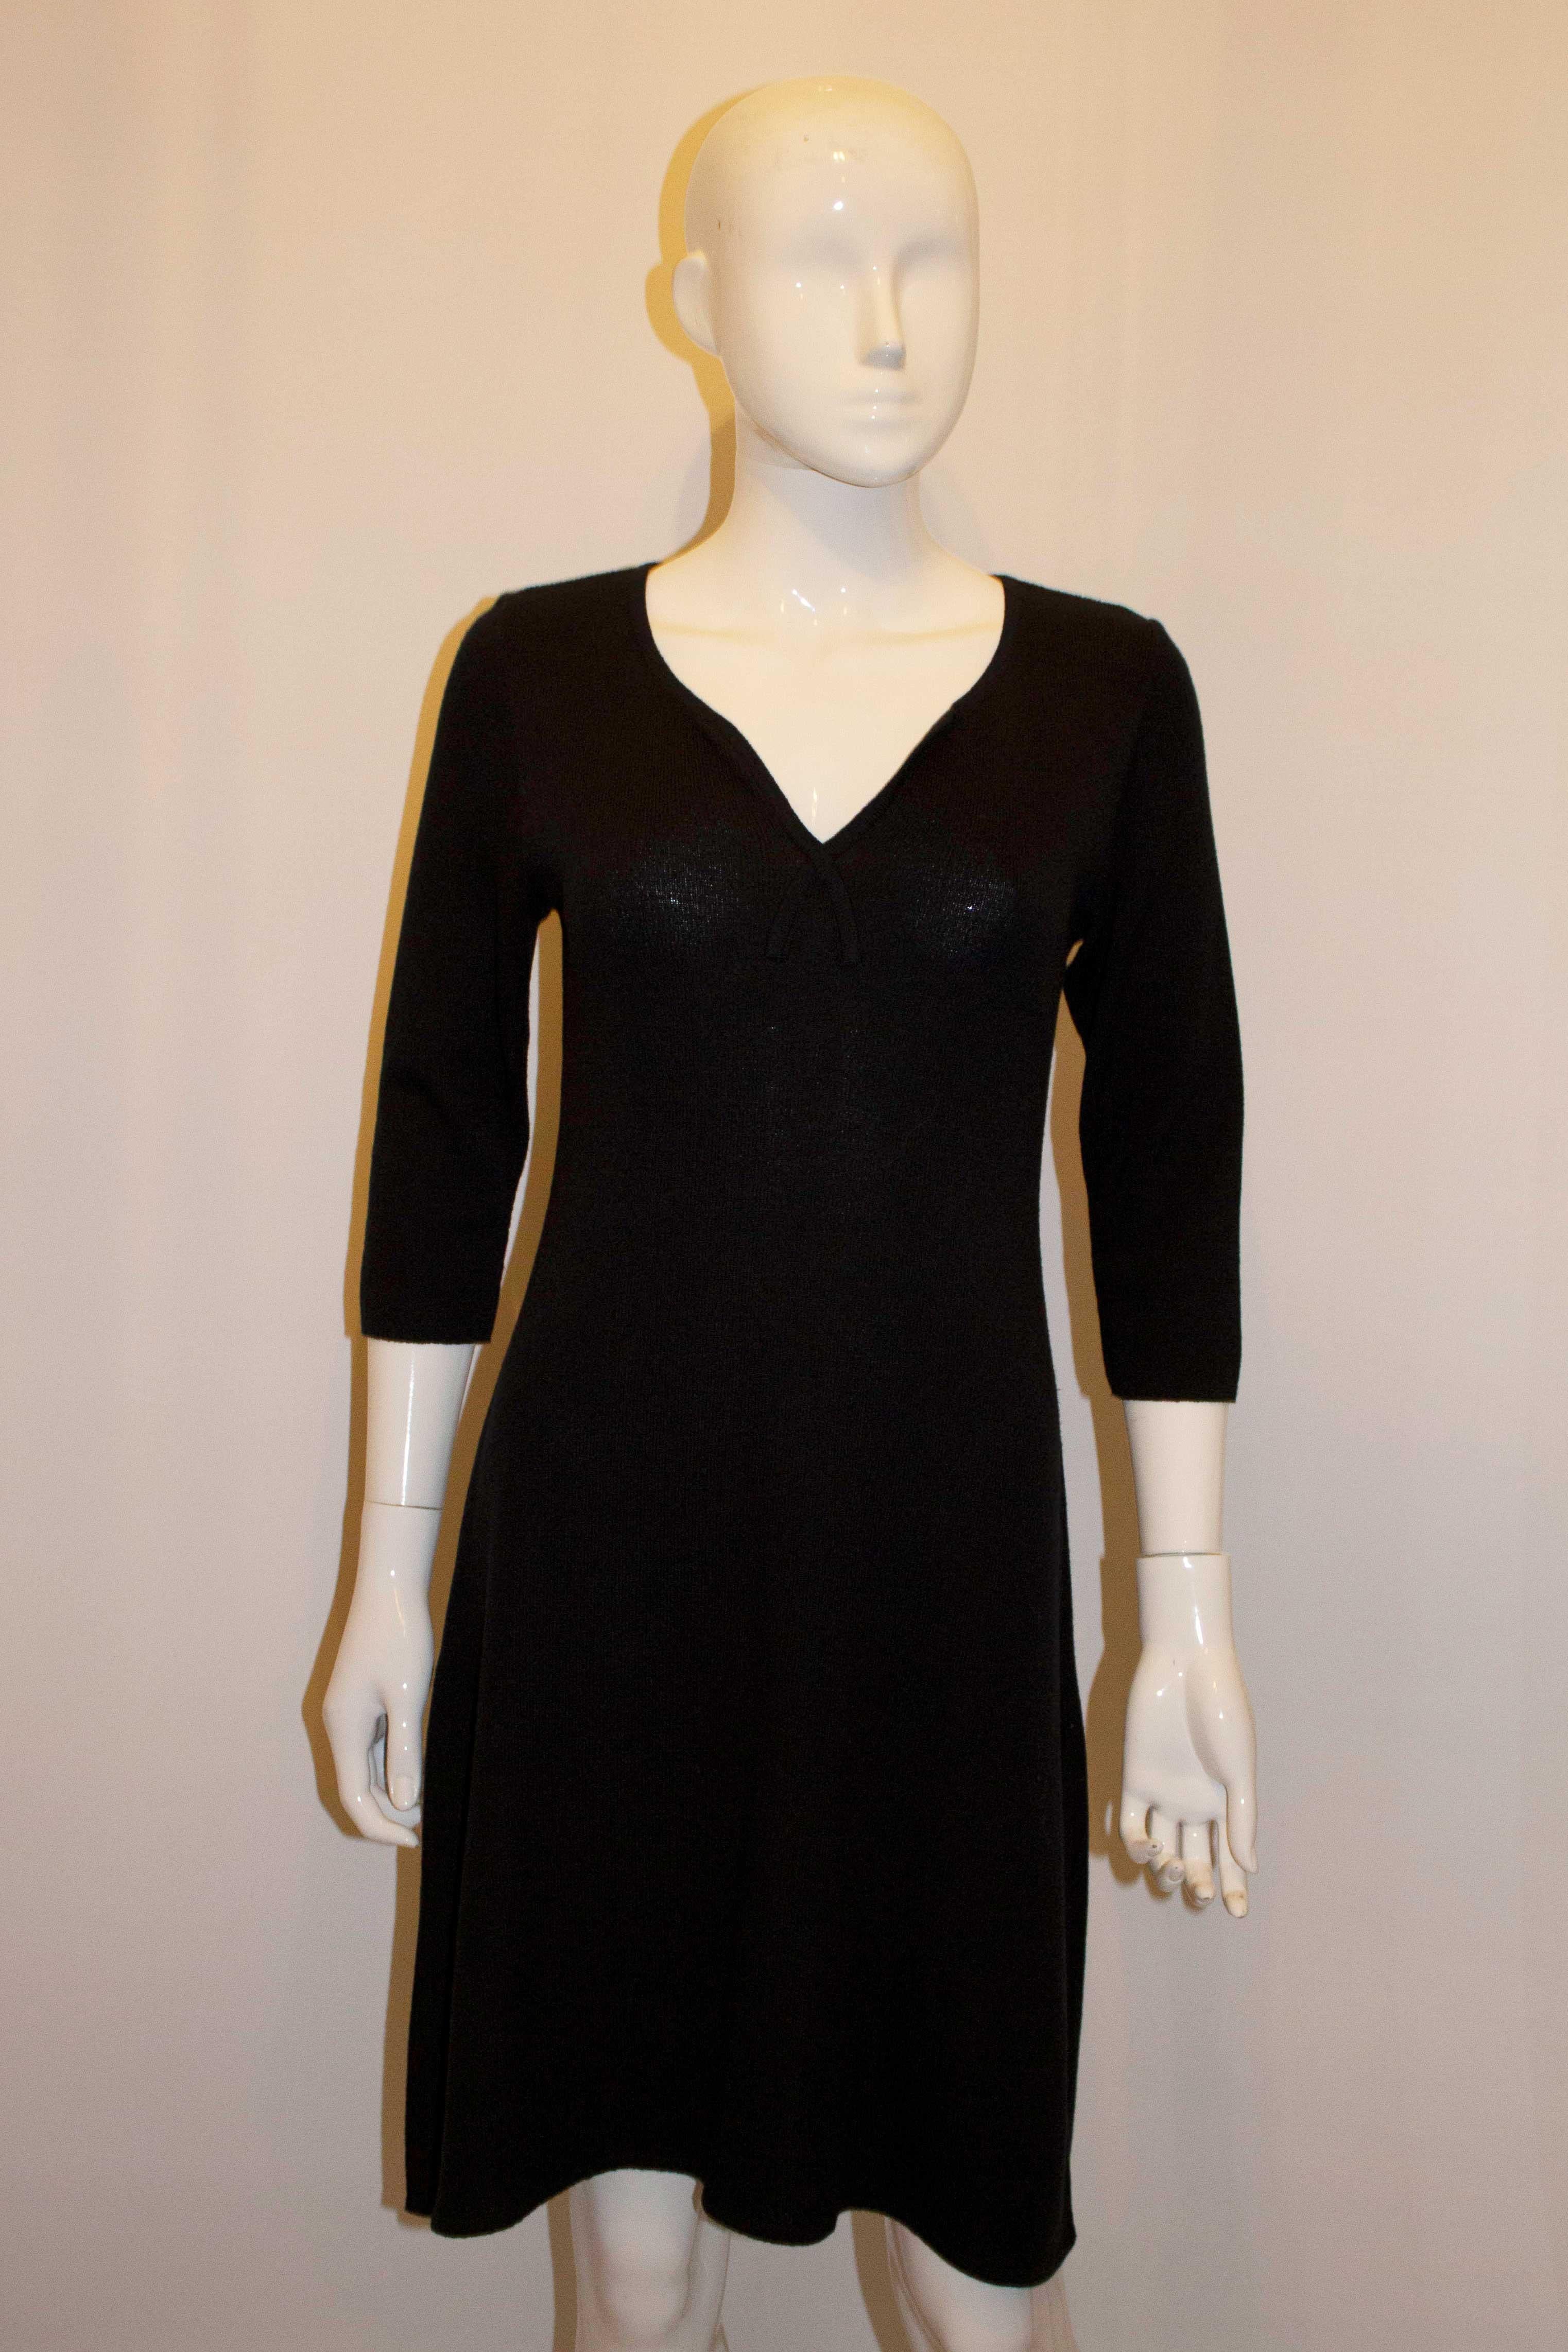 Women's Black Knitted Dress by Eric Bergere For Sale